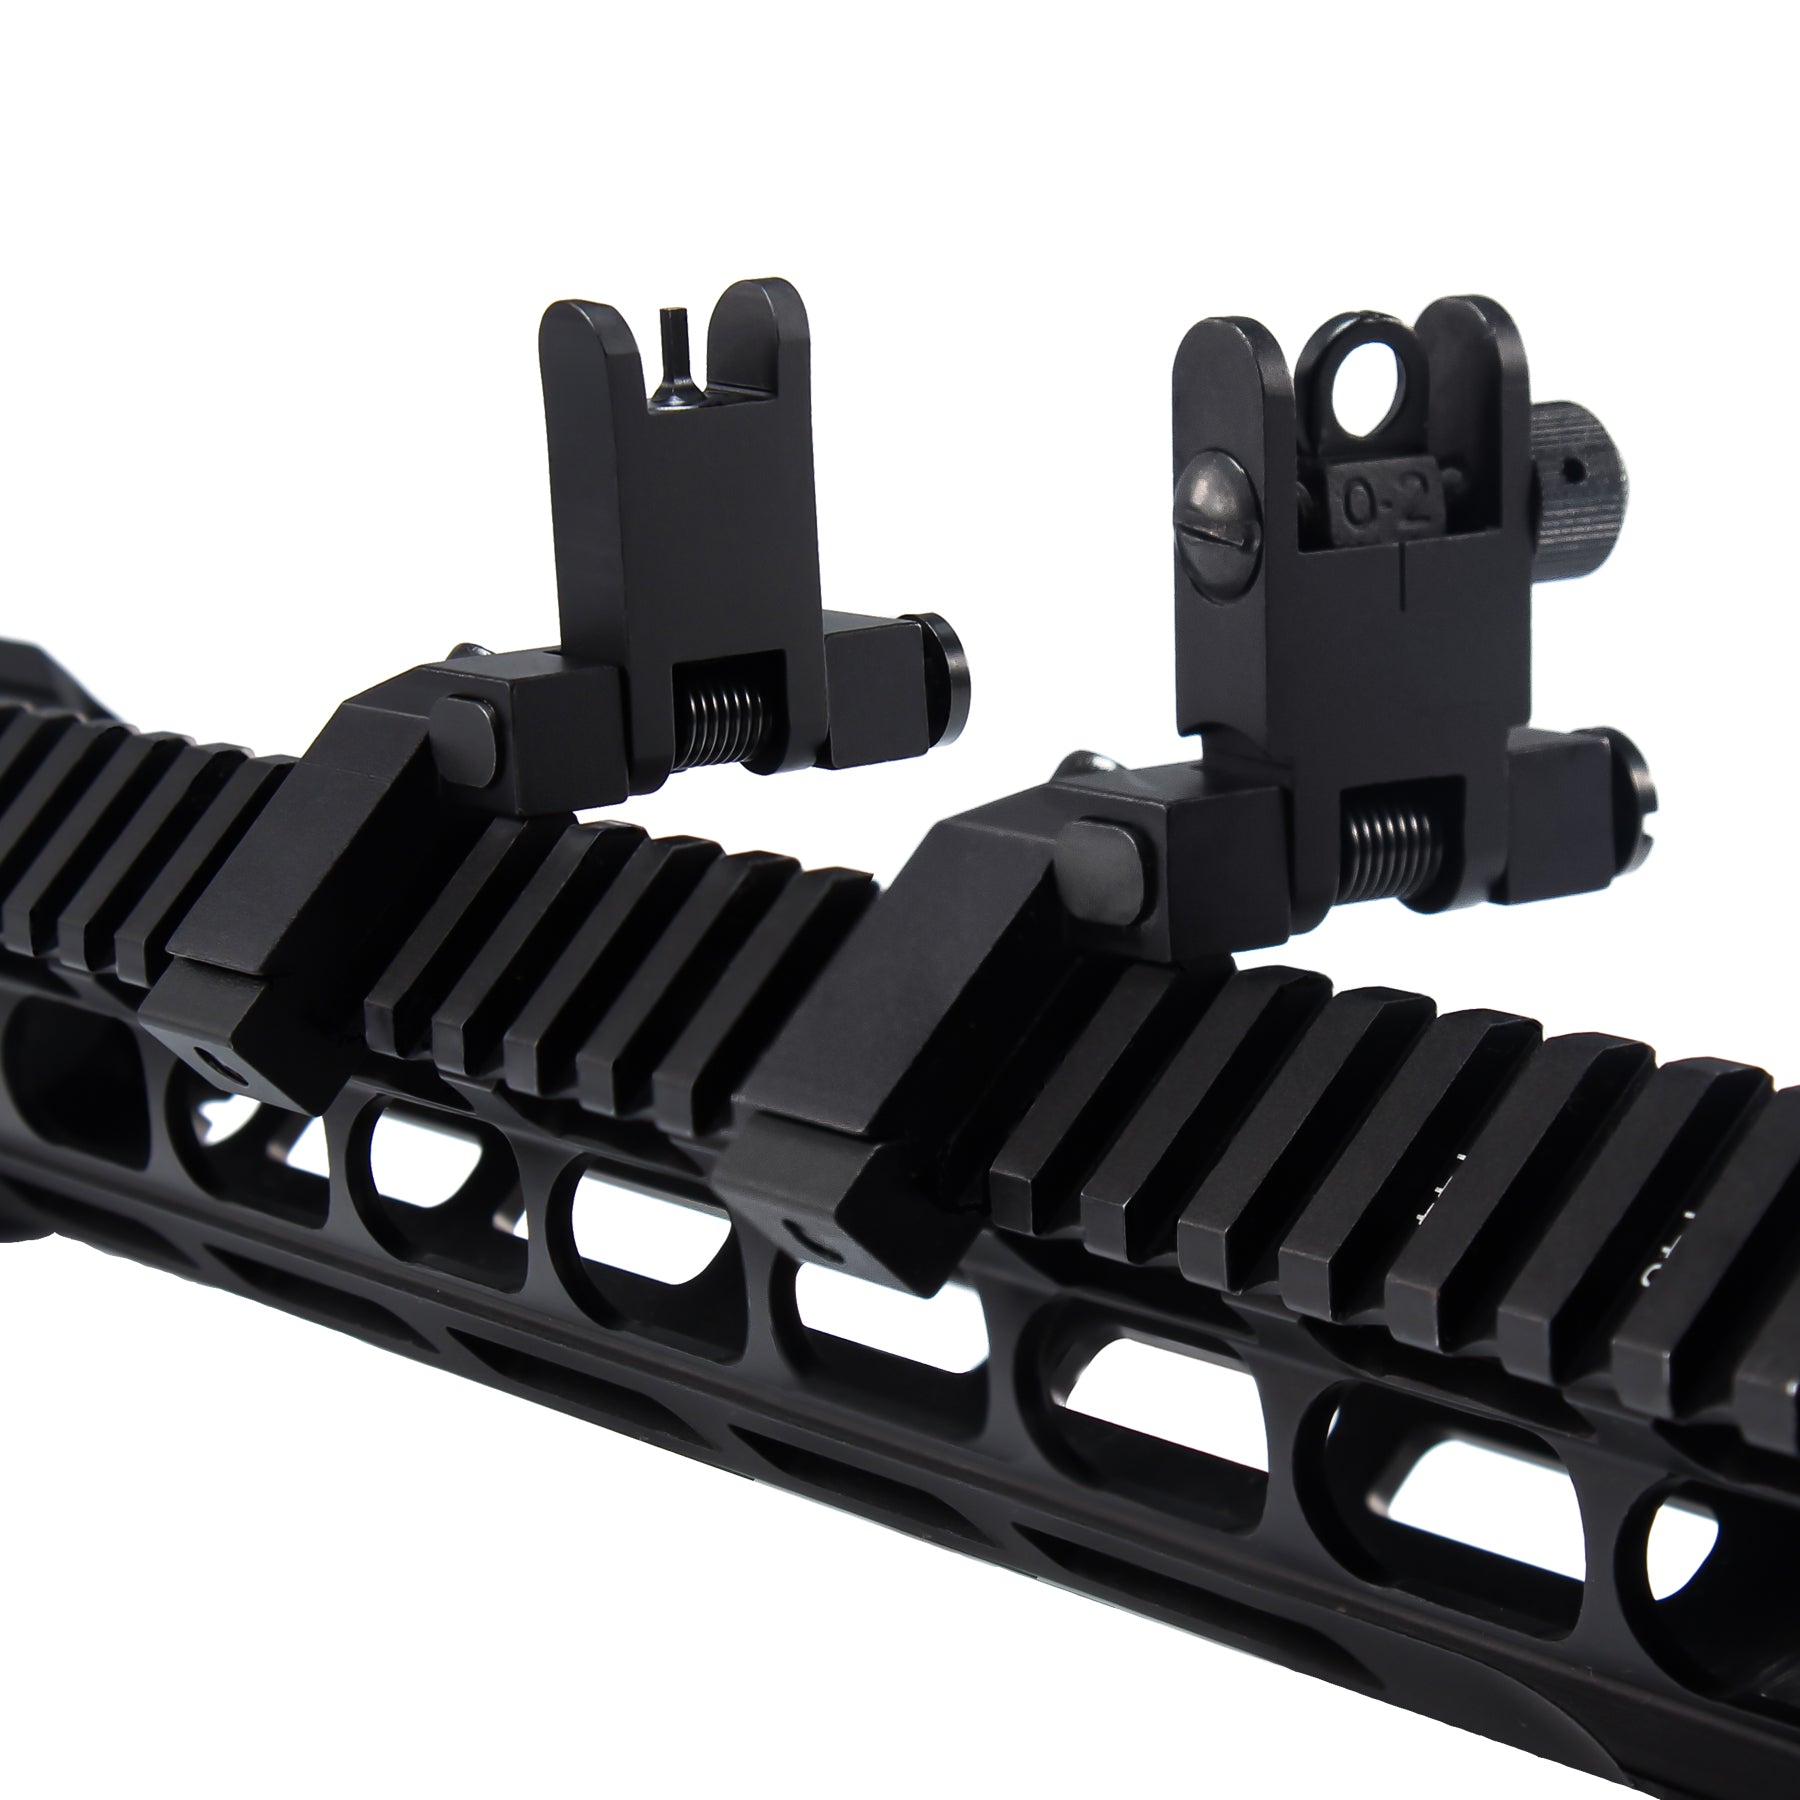 45 Degree Offset Iron Sights Flip Up BUIS Rapid Transition Backup Front Rear Iron Sight